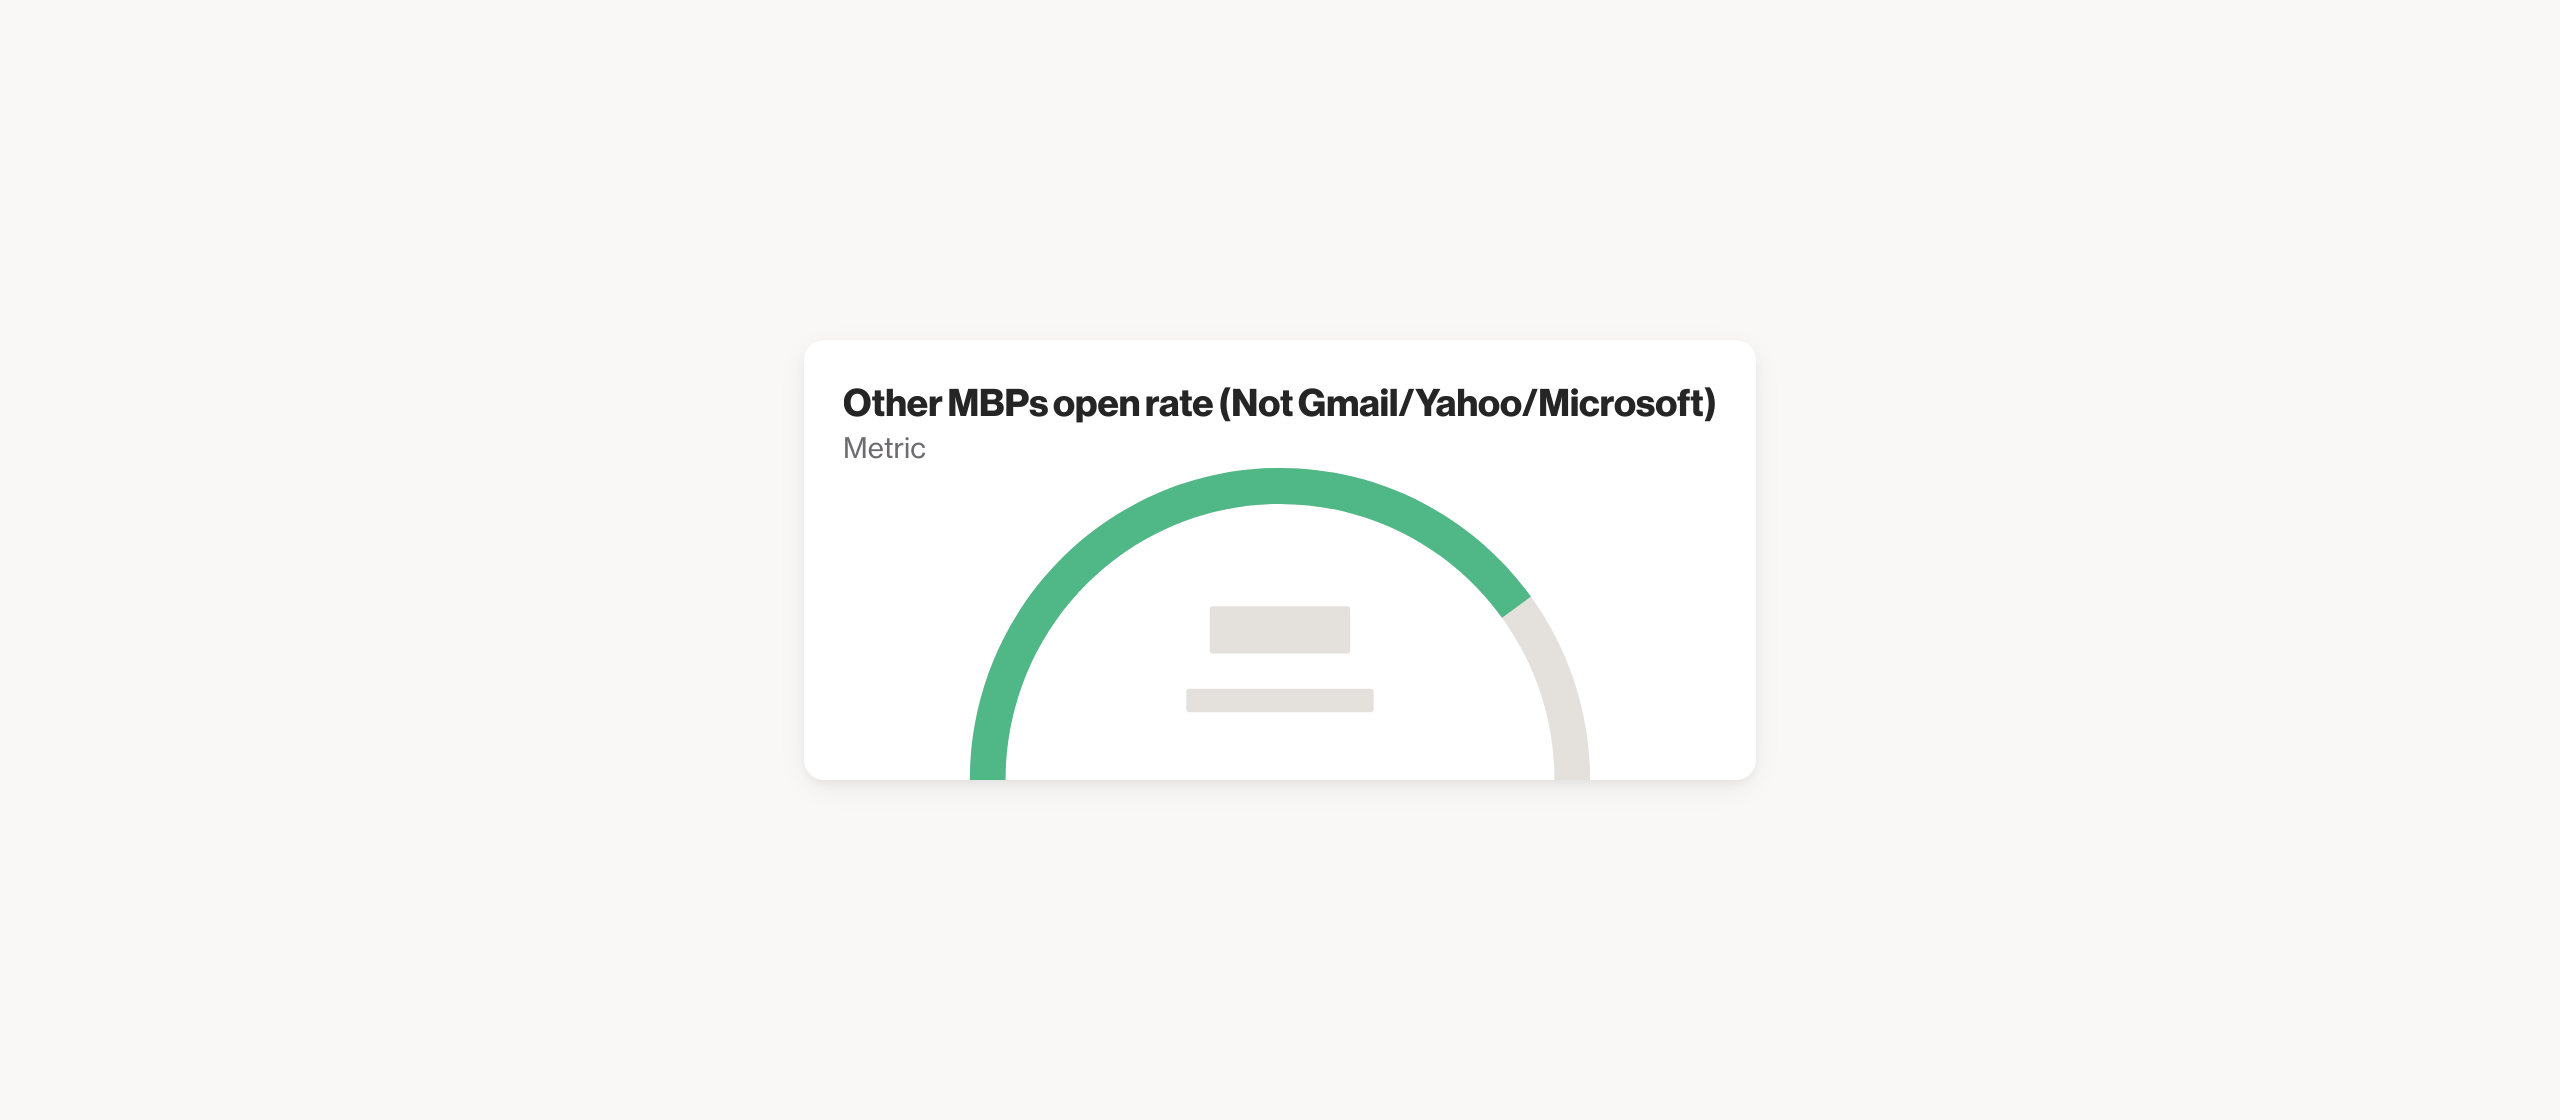 Other MBPs open rate (Not Gmail/Yahoo/Microsoft)